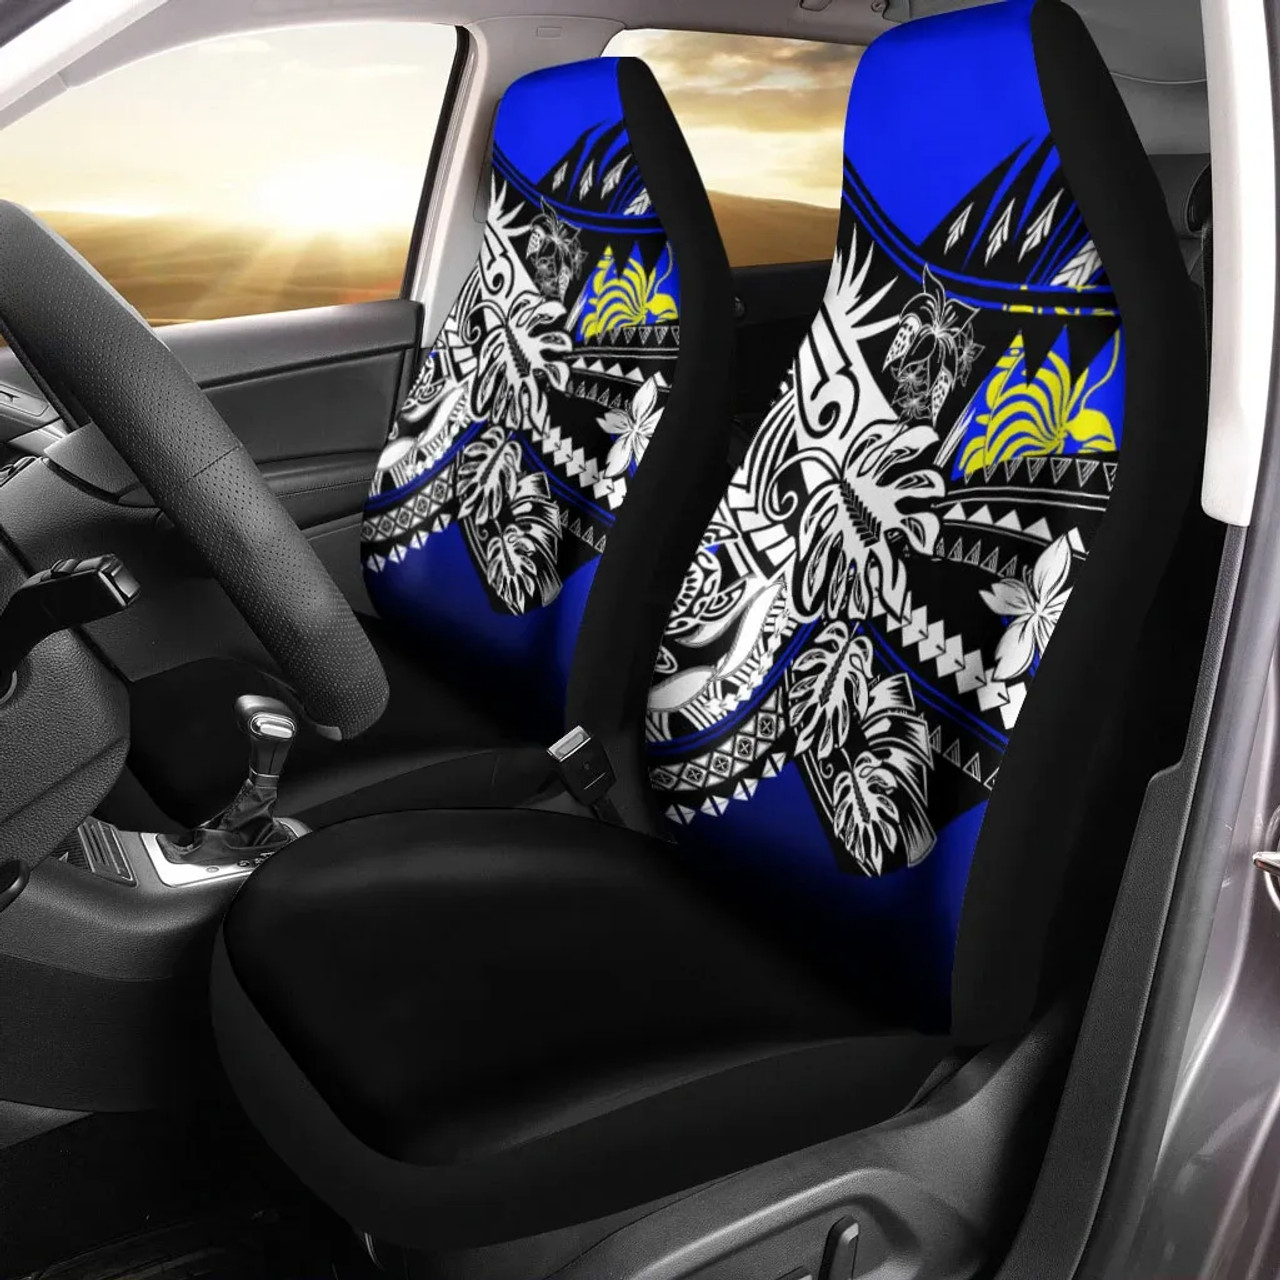 New Caledonia Car Seat Cover - The Flow OF Ocean Blue Color